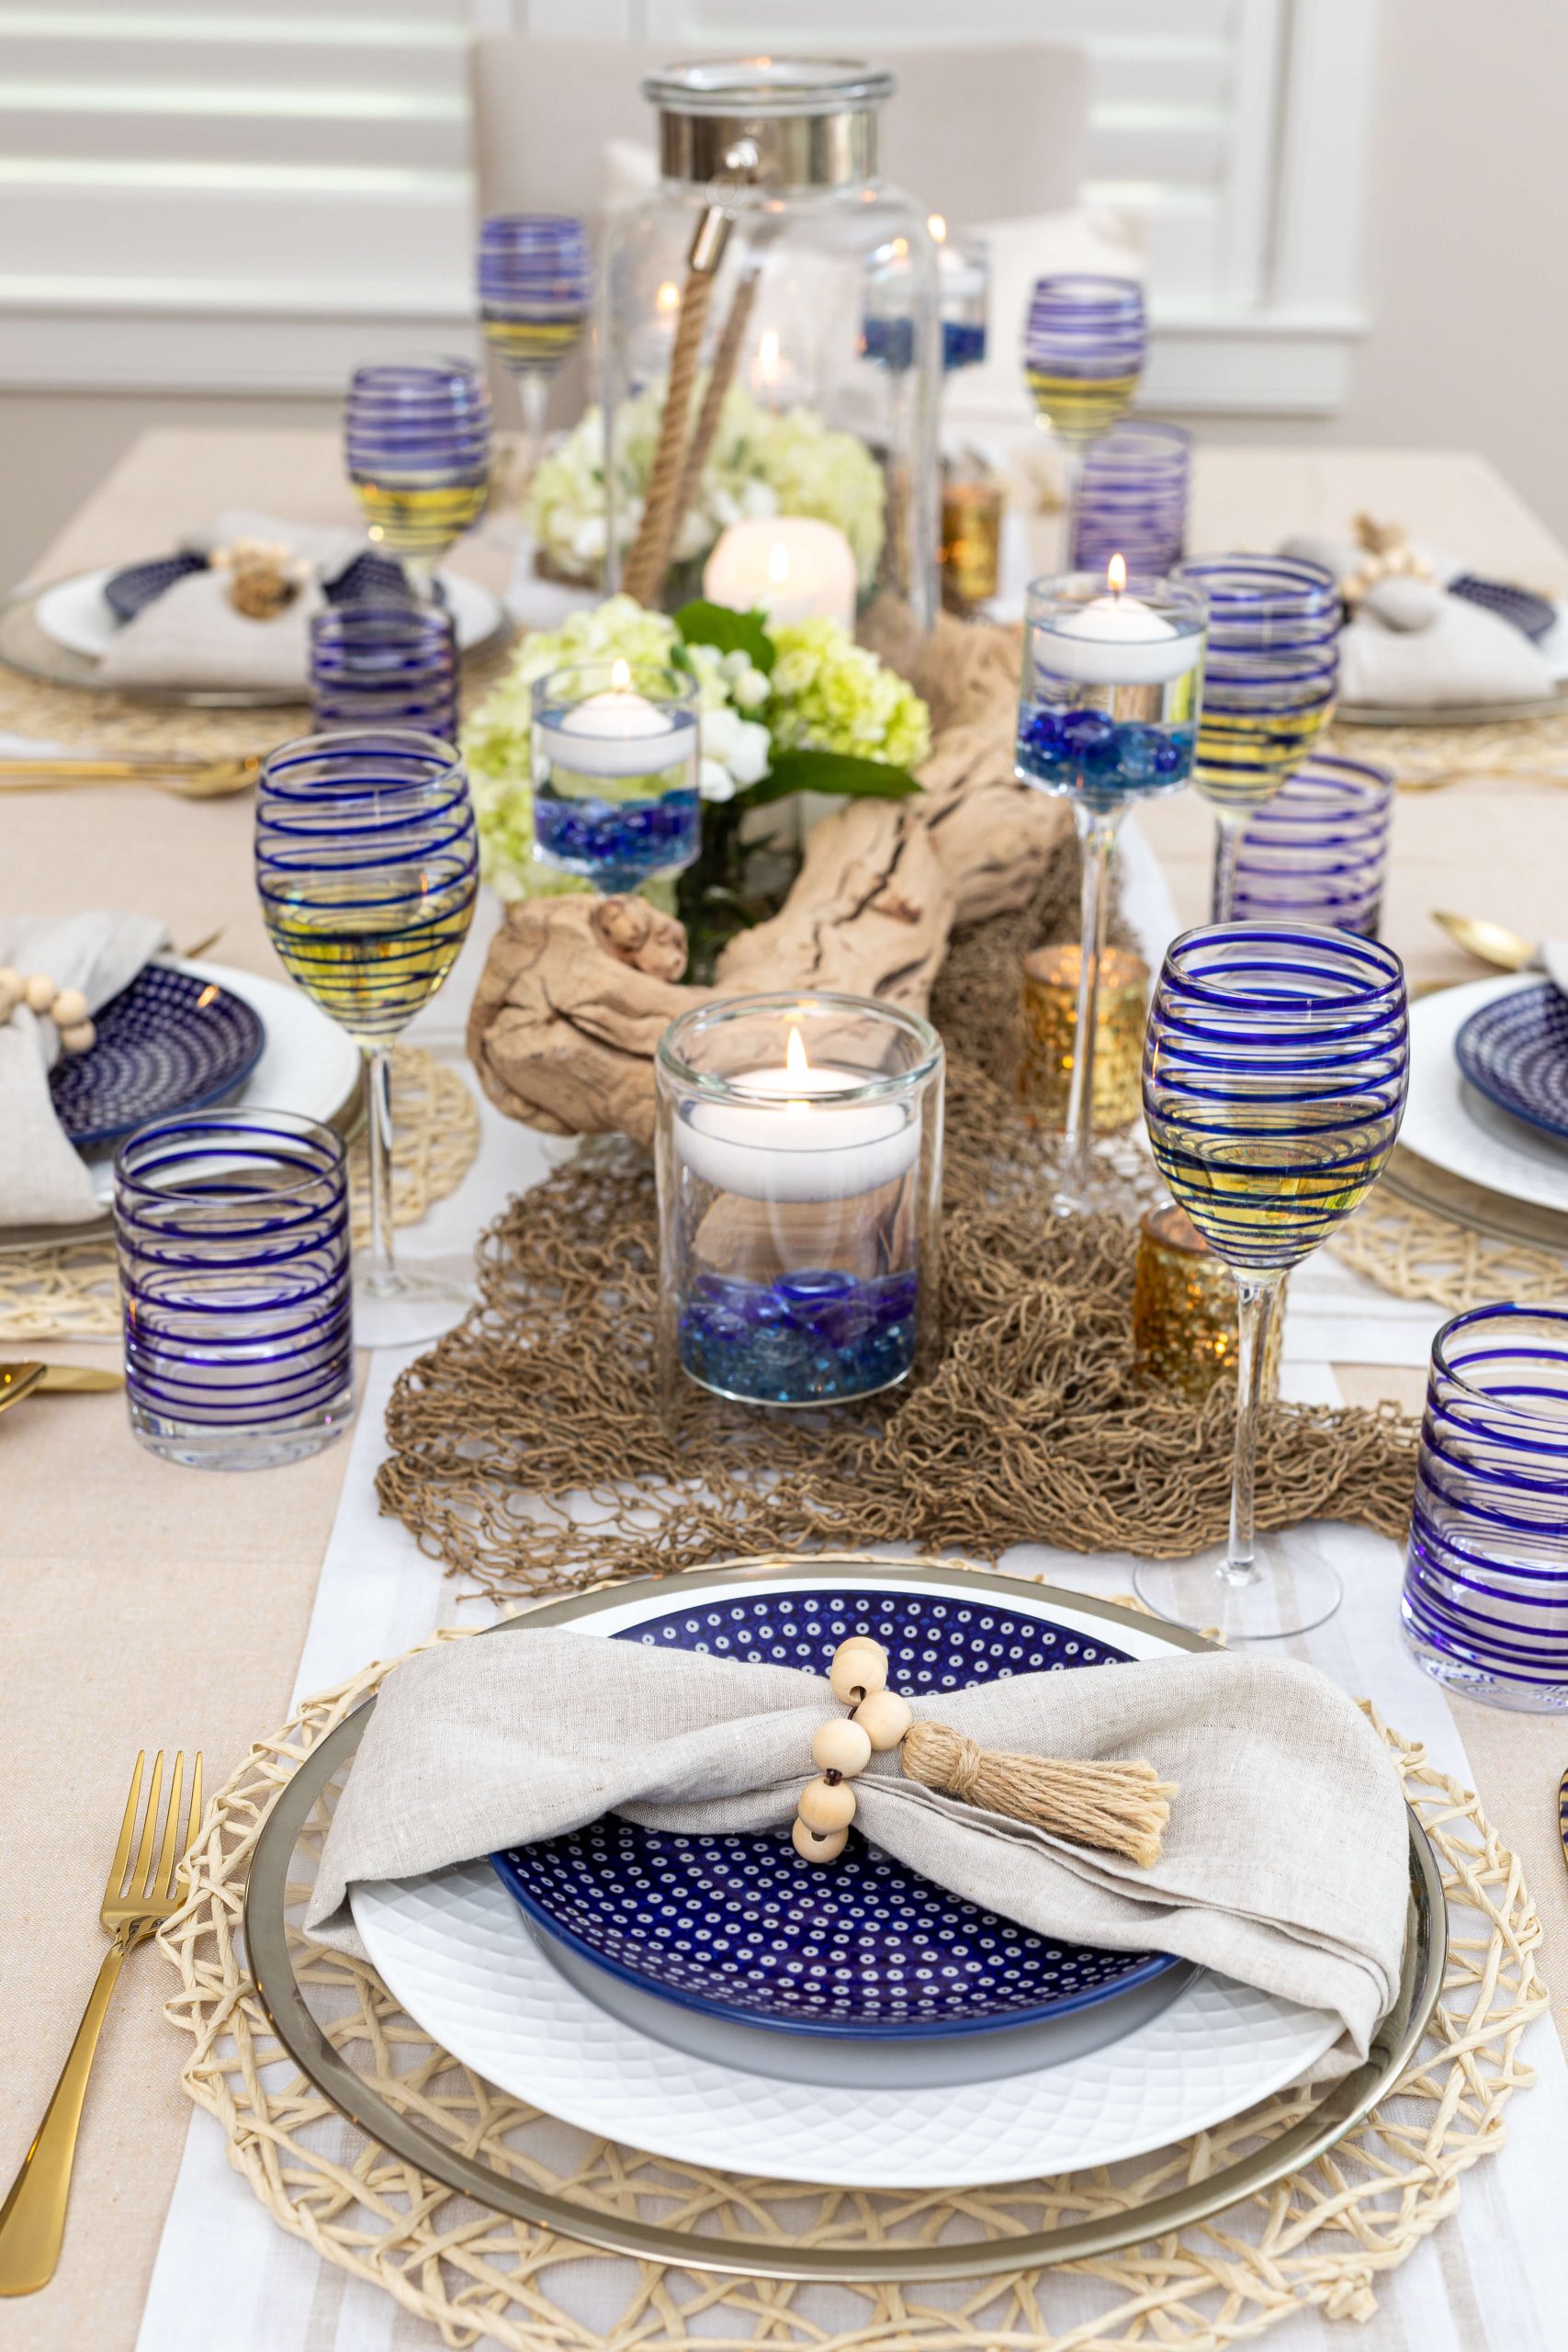 FLIPPING TABLESCAPES - 2022-20